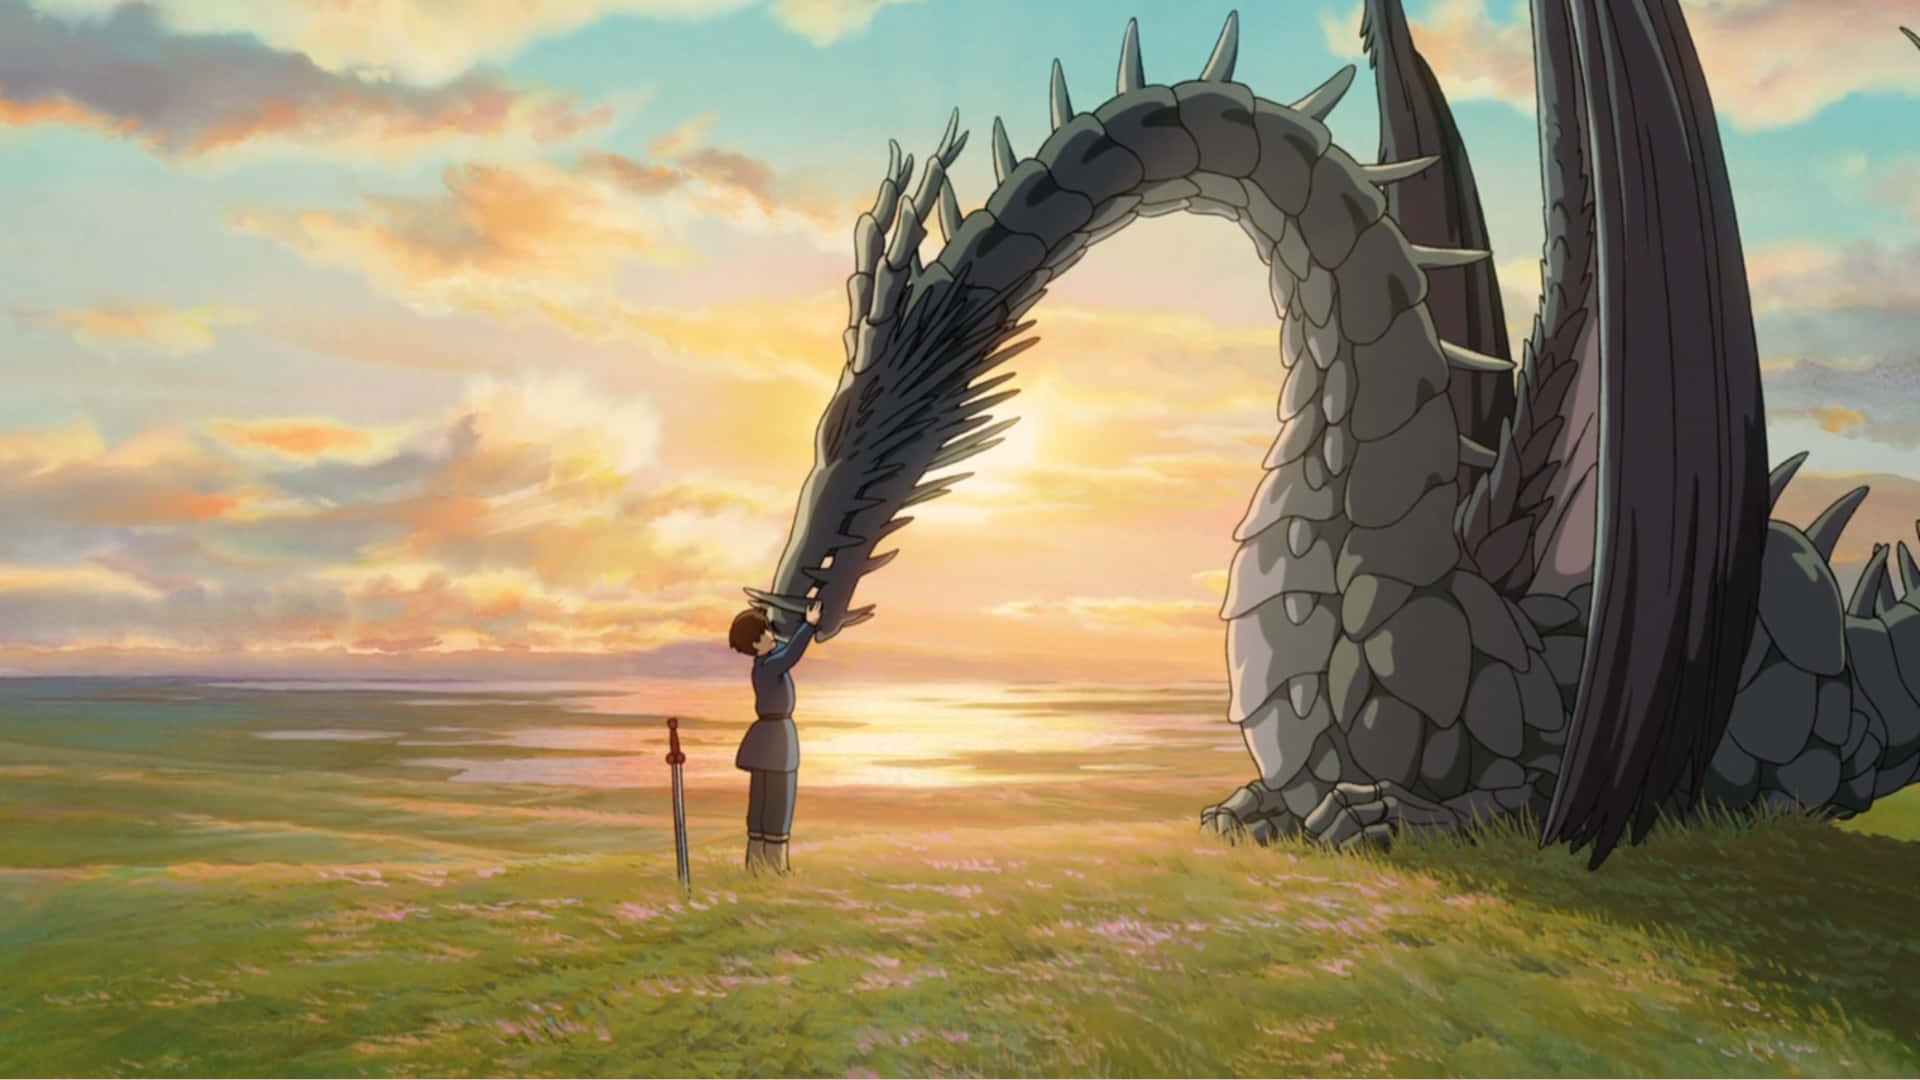 Ged and Arren traveling the vast landscapes in Tales from Earthsea Wallpaper